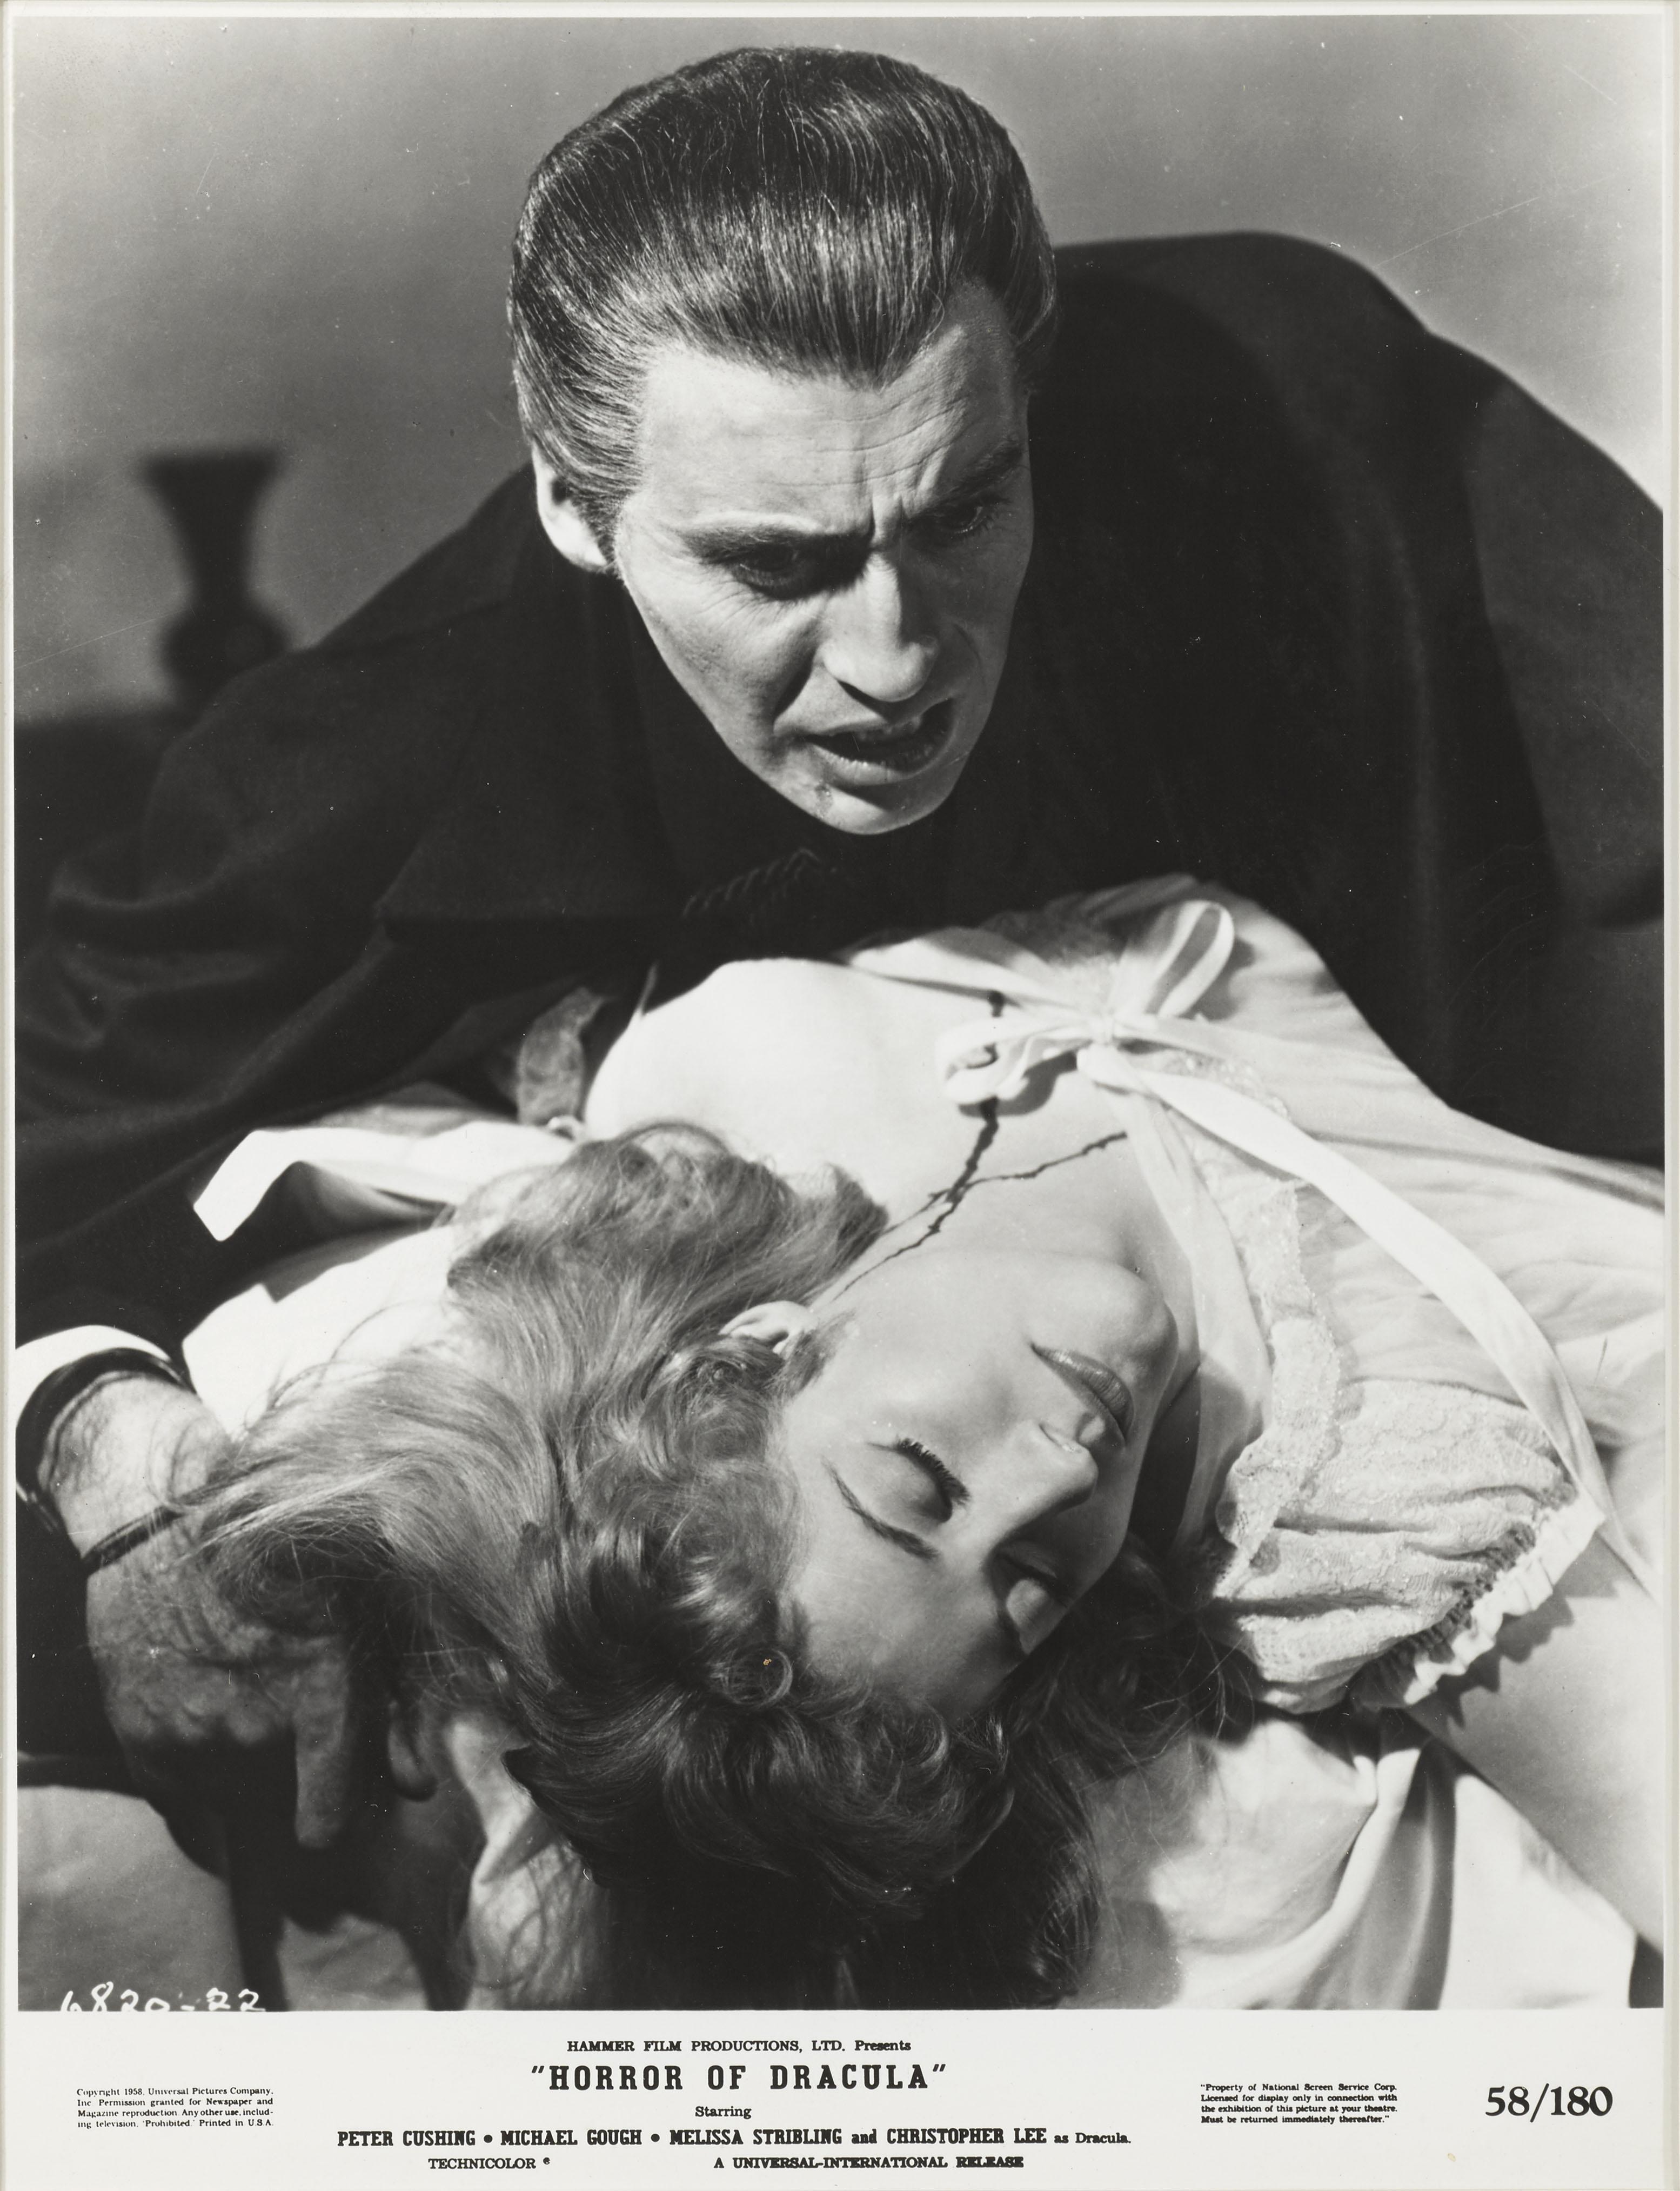 Original US photographic production still used to promote the film Dracula 1958 released as Horror of Dracula in the US.
The film starred Peter Cushing and Christopher Lee and was directed by Terence Fisher. The size given is before framing. The